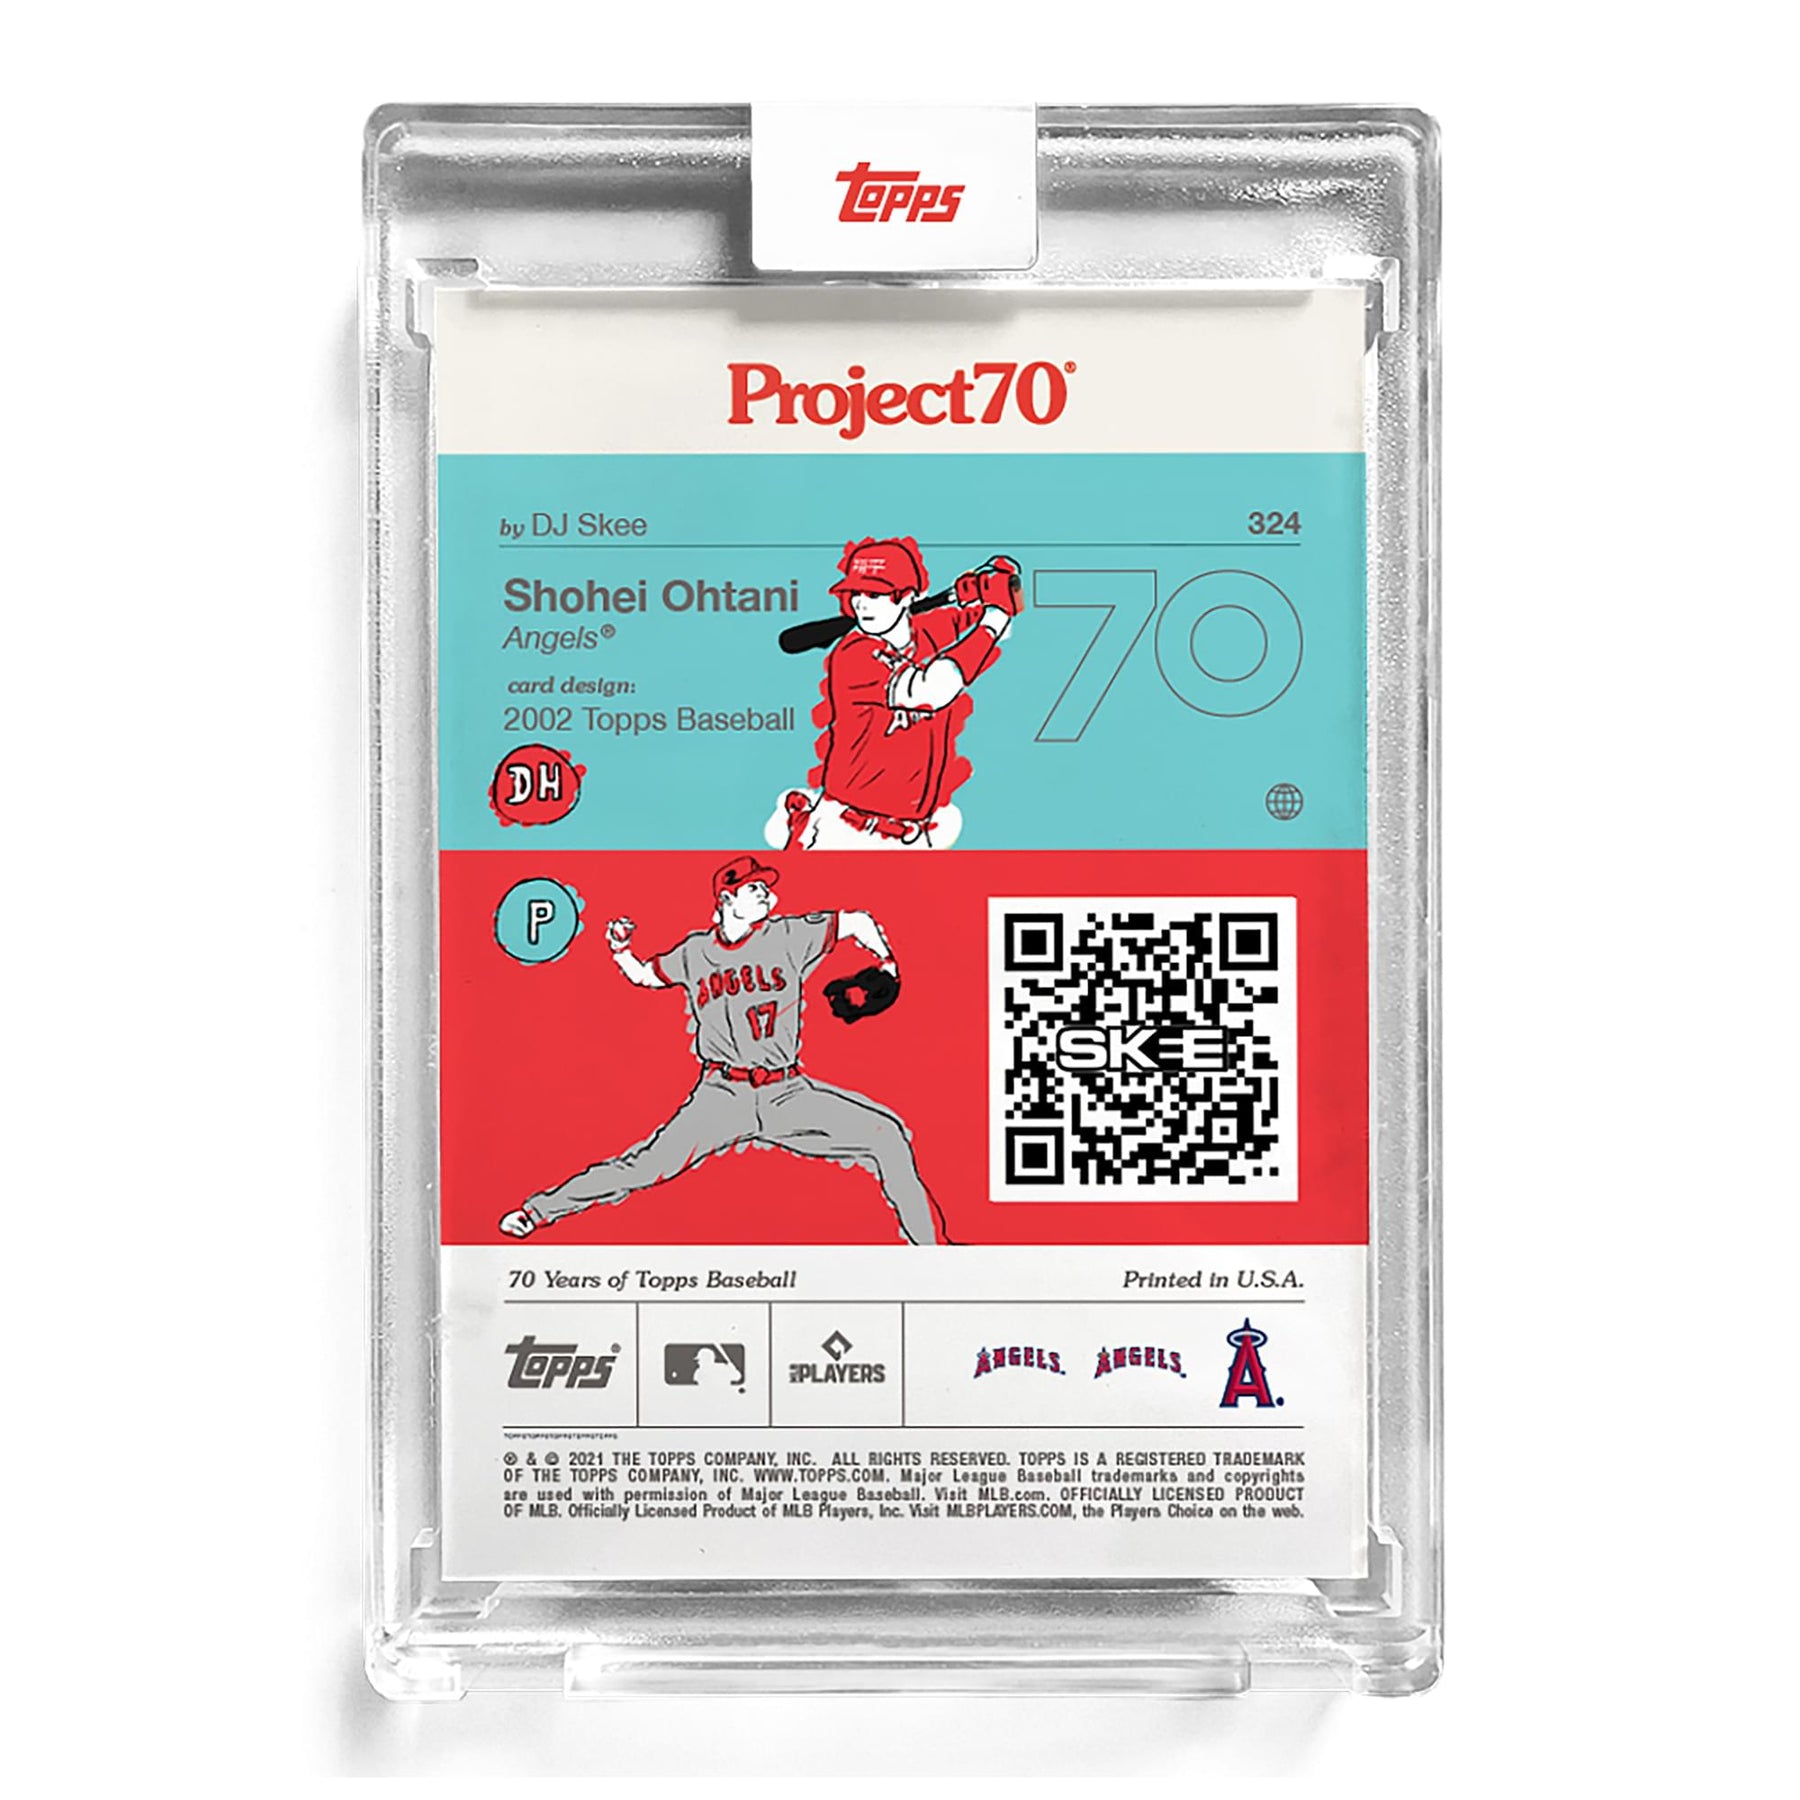 MLB Topps Project70 Card 324 | 1957 Shohei Ohtani by DJ Skee